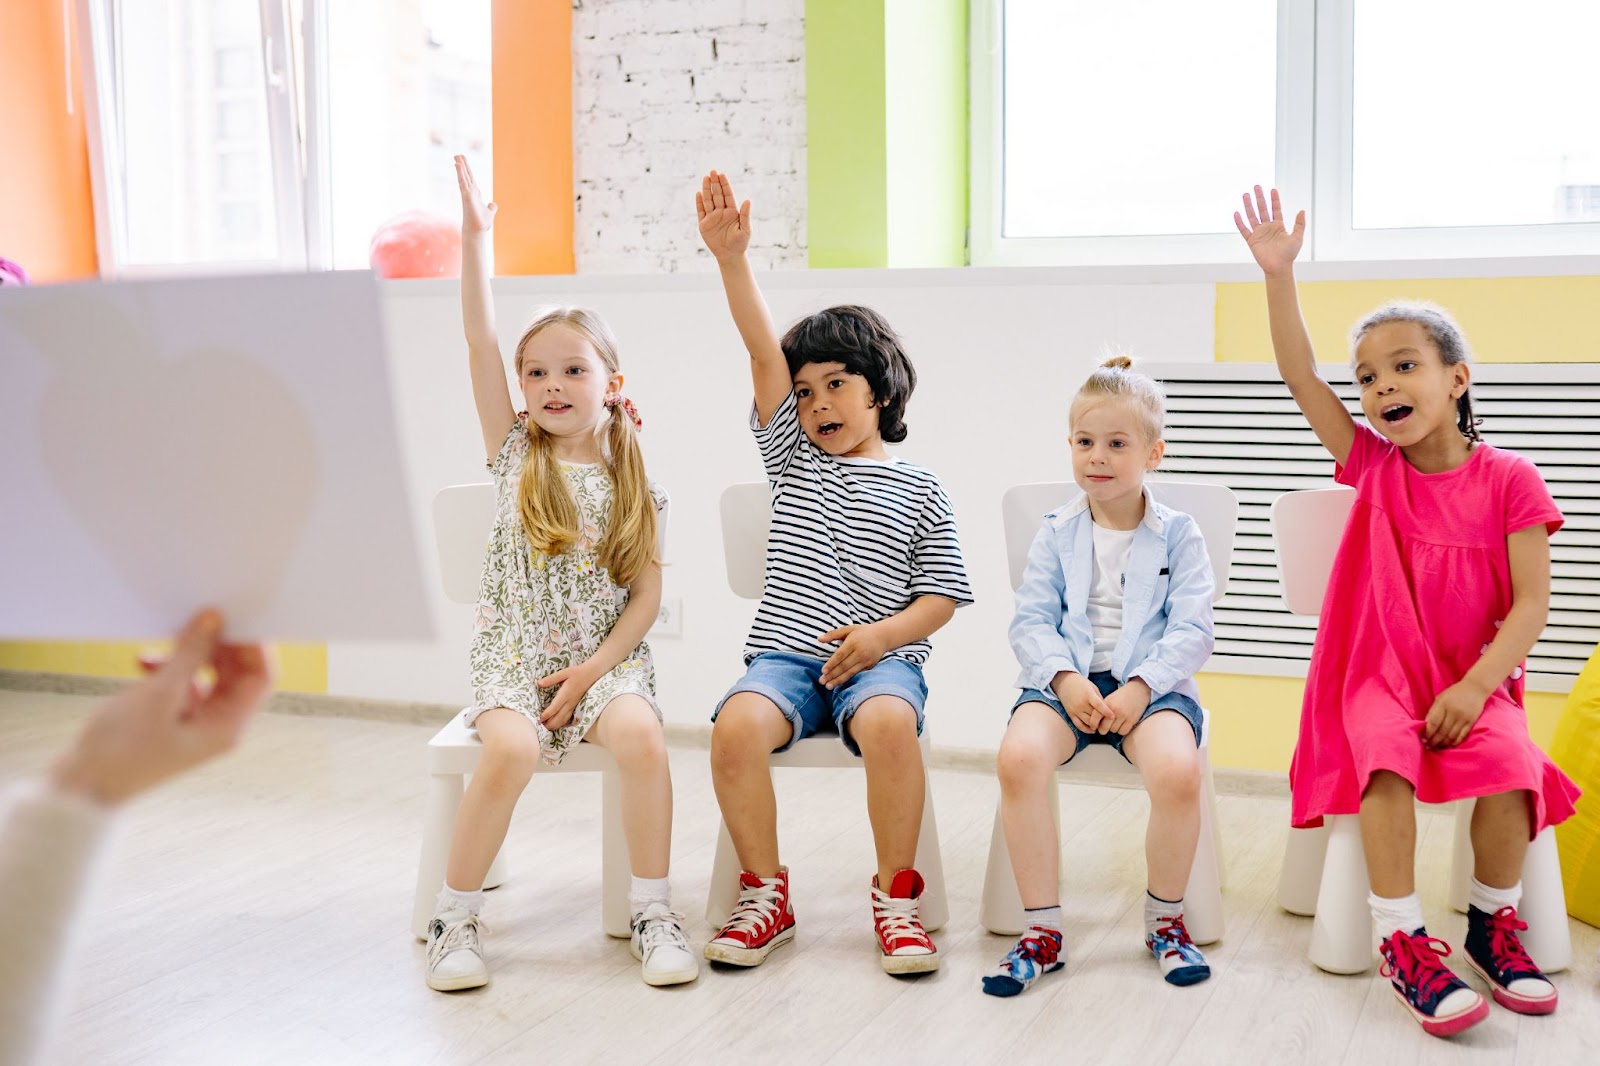 Children sitting on stools in classroom raising their hands in the air.